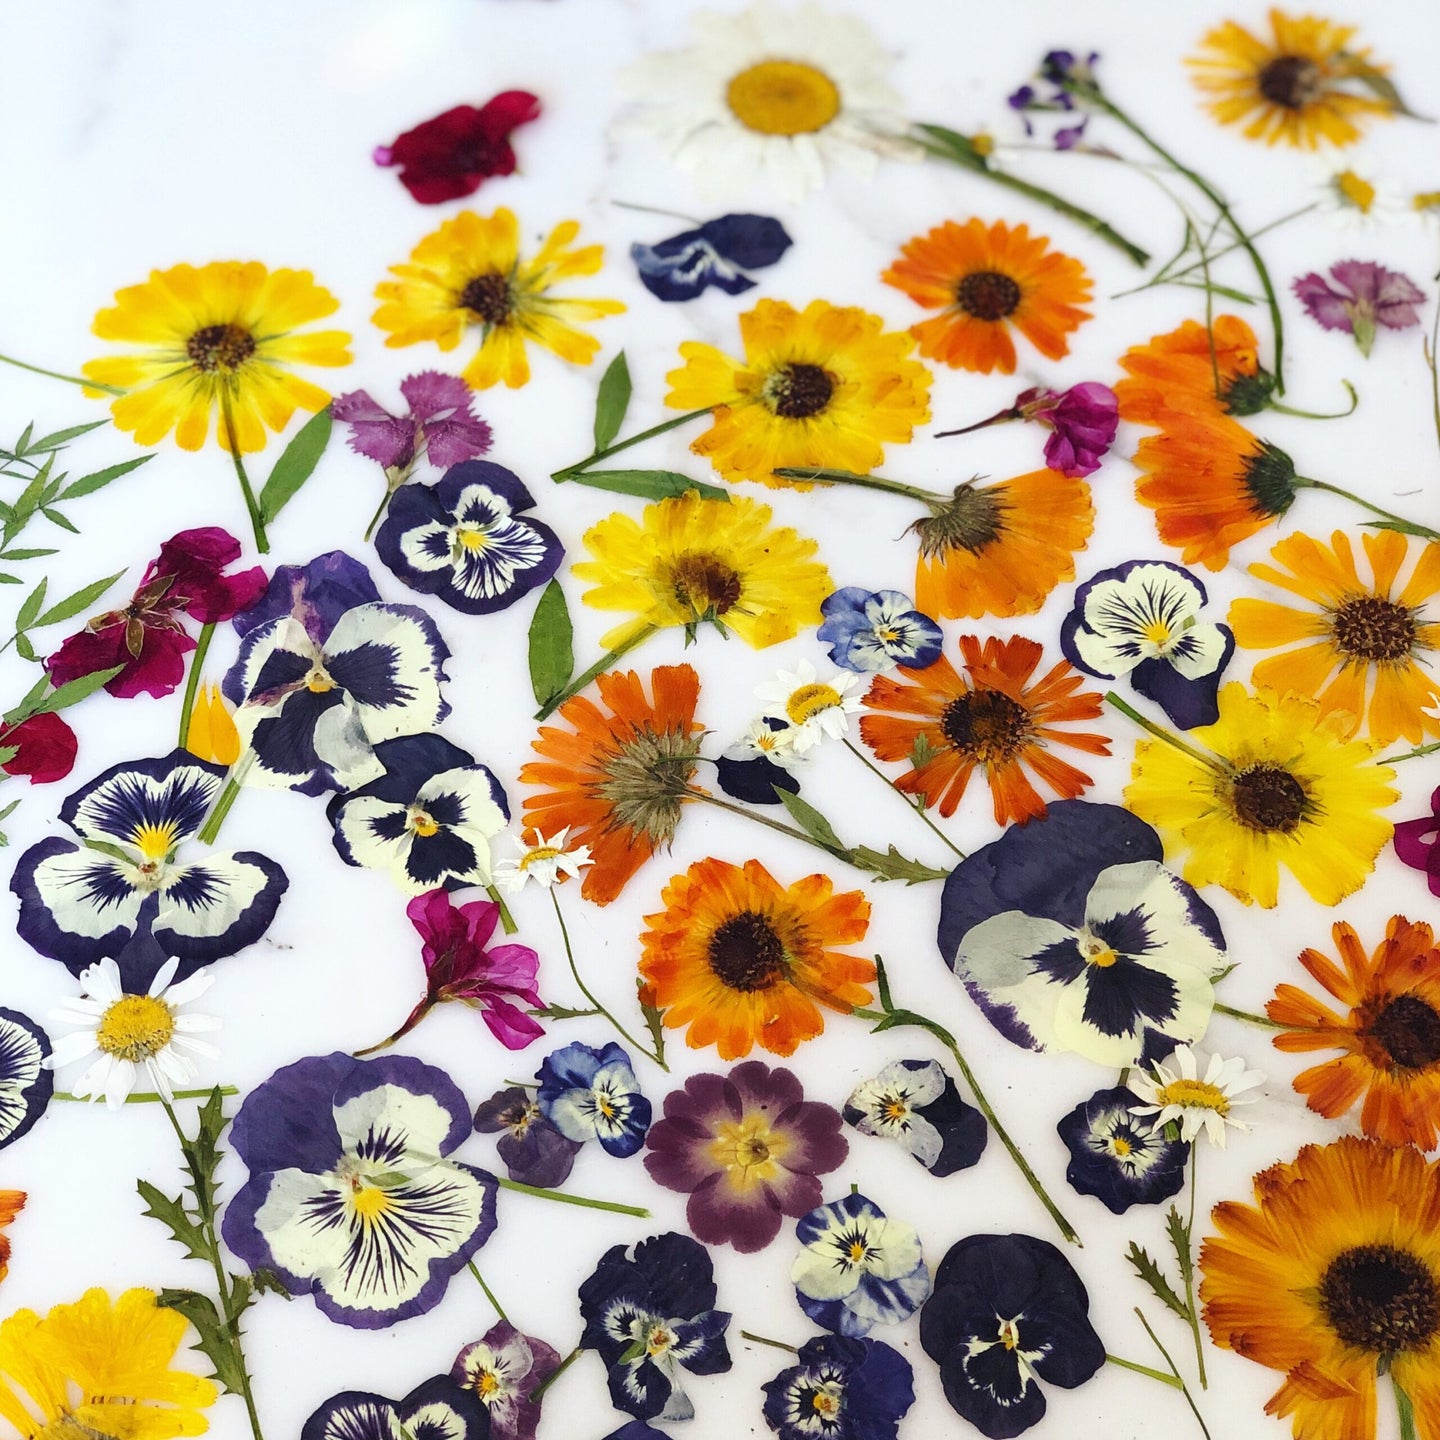 It’s time to start adding edible flowers to your food